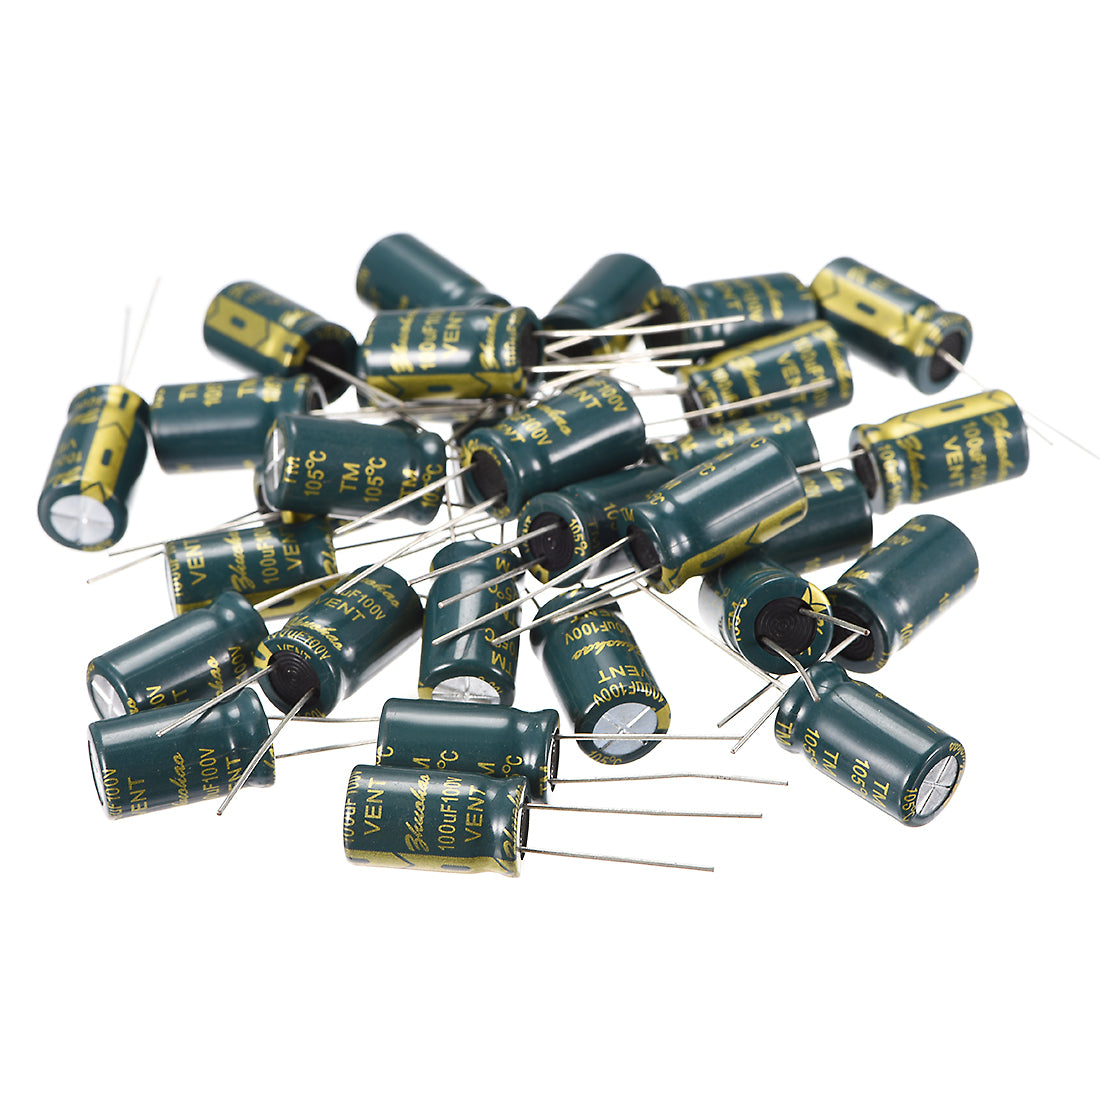 uxcell Uxcell Aluminum Radial Electrolytic Capacitor Low ESR Green with 100uF 100V 105 Celsius Life 3000H 10 x 17 mm High Ripple Current,Low Impedance 30pcs